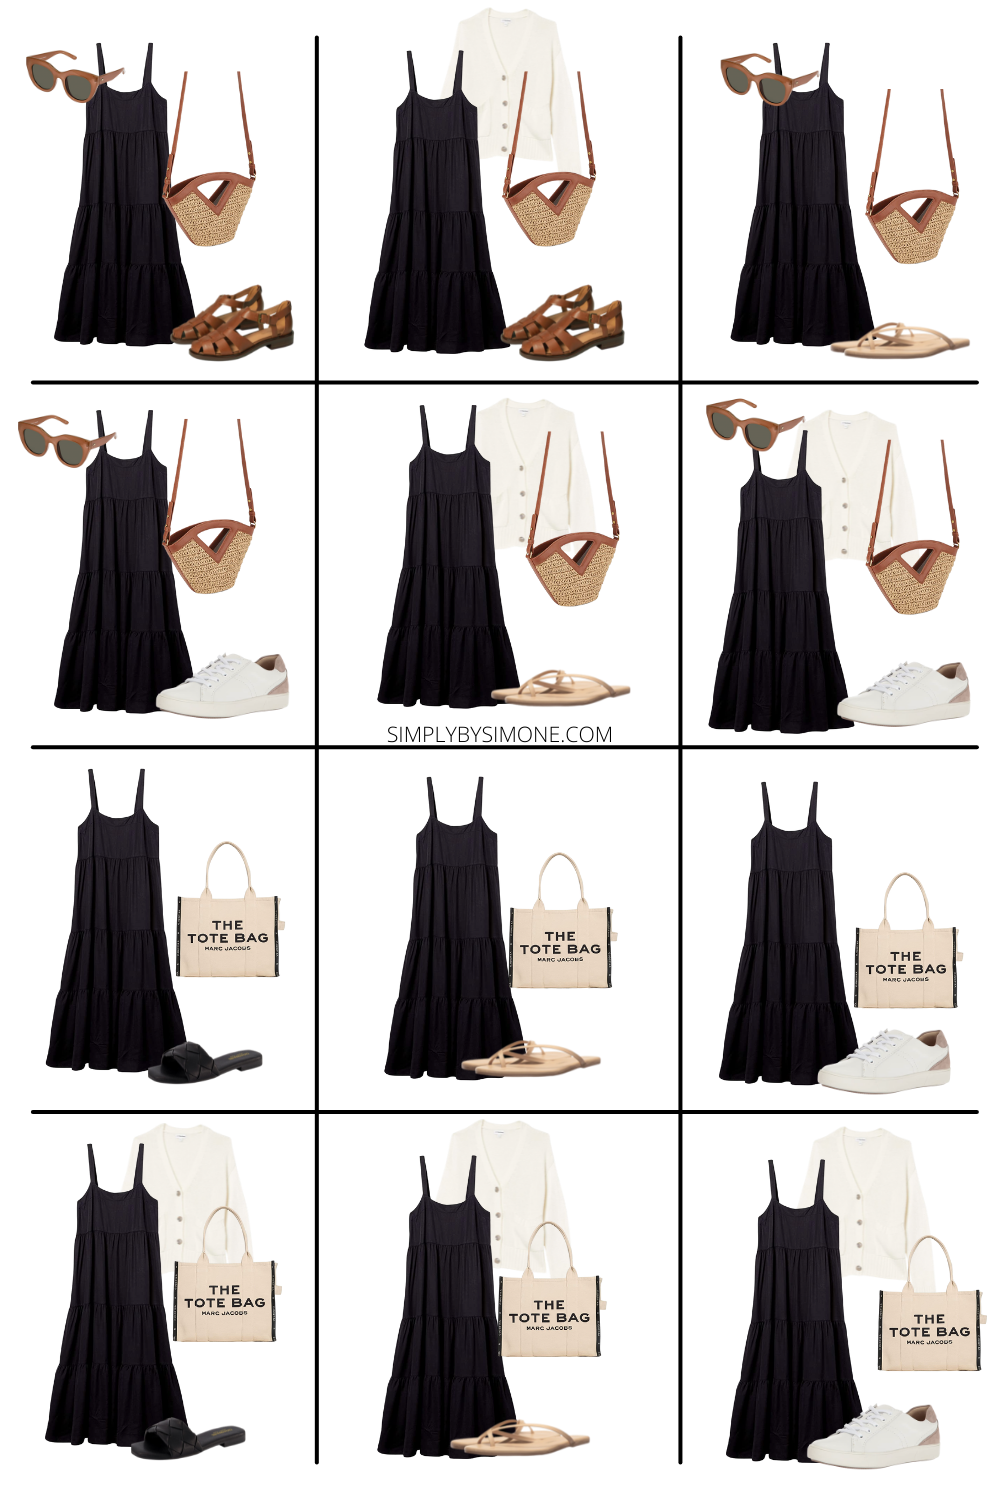 Wardrobe | Amazon Fall Clothes | Outfit Inspiration | 48 Pre-Fall Weather Outfit Ideas | Fall Vacation Packing Guide | Amazon Pre-Fall Capsule Wardrobe - What To Wear This Fall 2022 | Parisian Outfit Ideas | Looks 37-48 | Simply by Simone